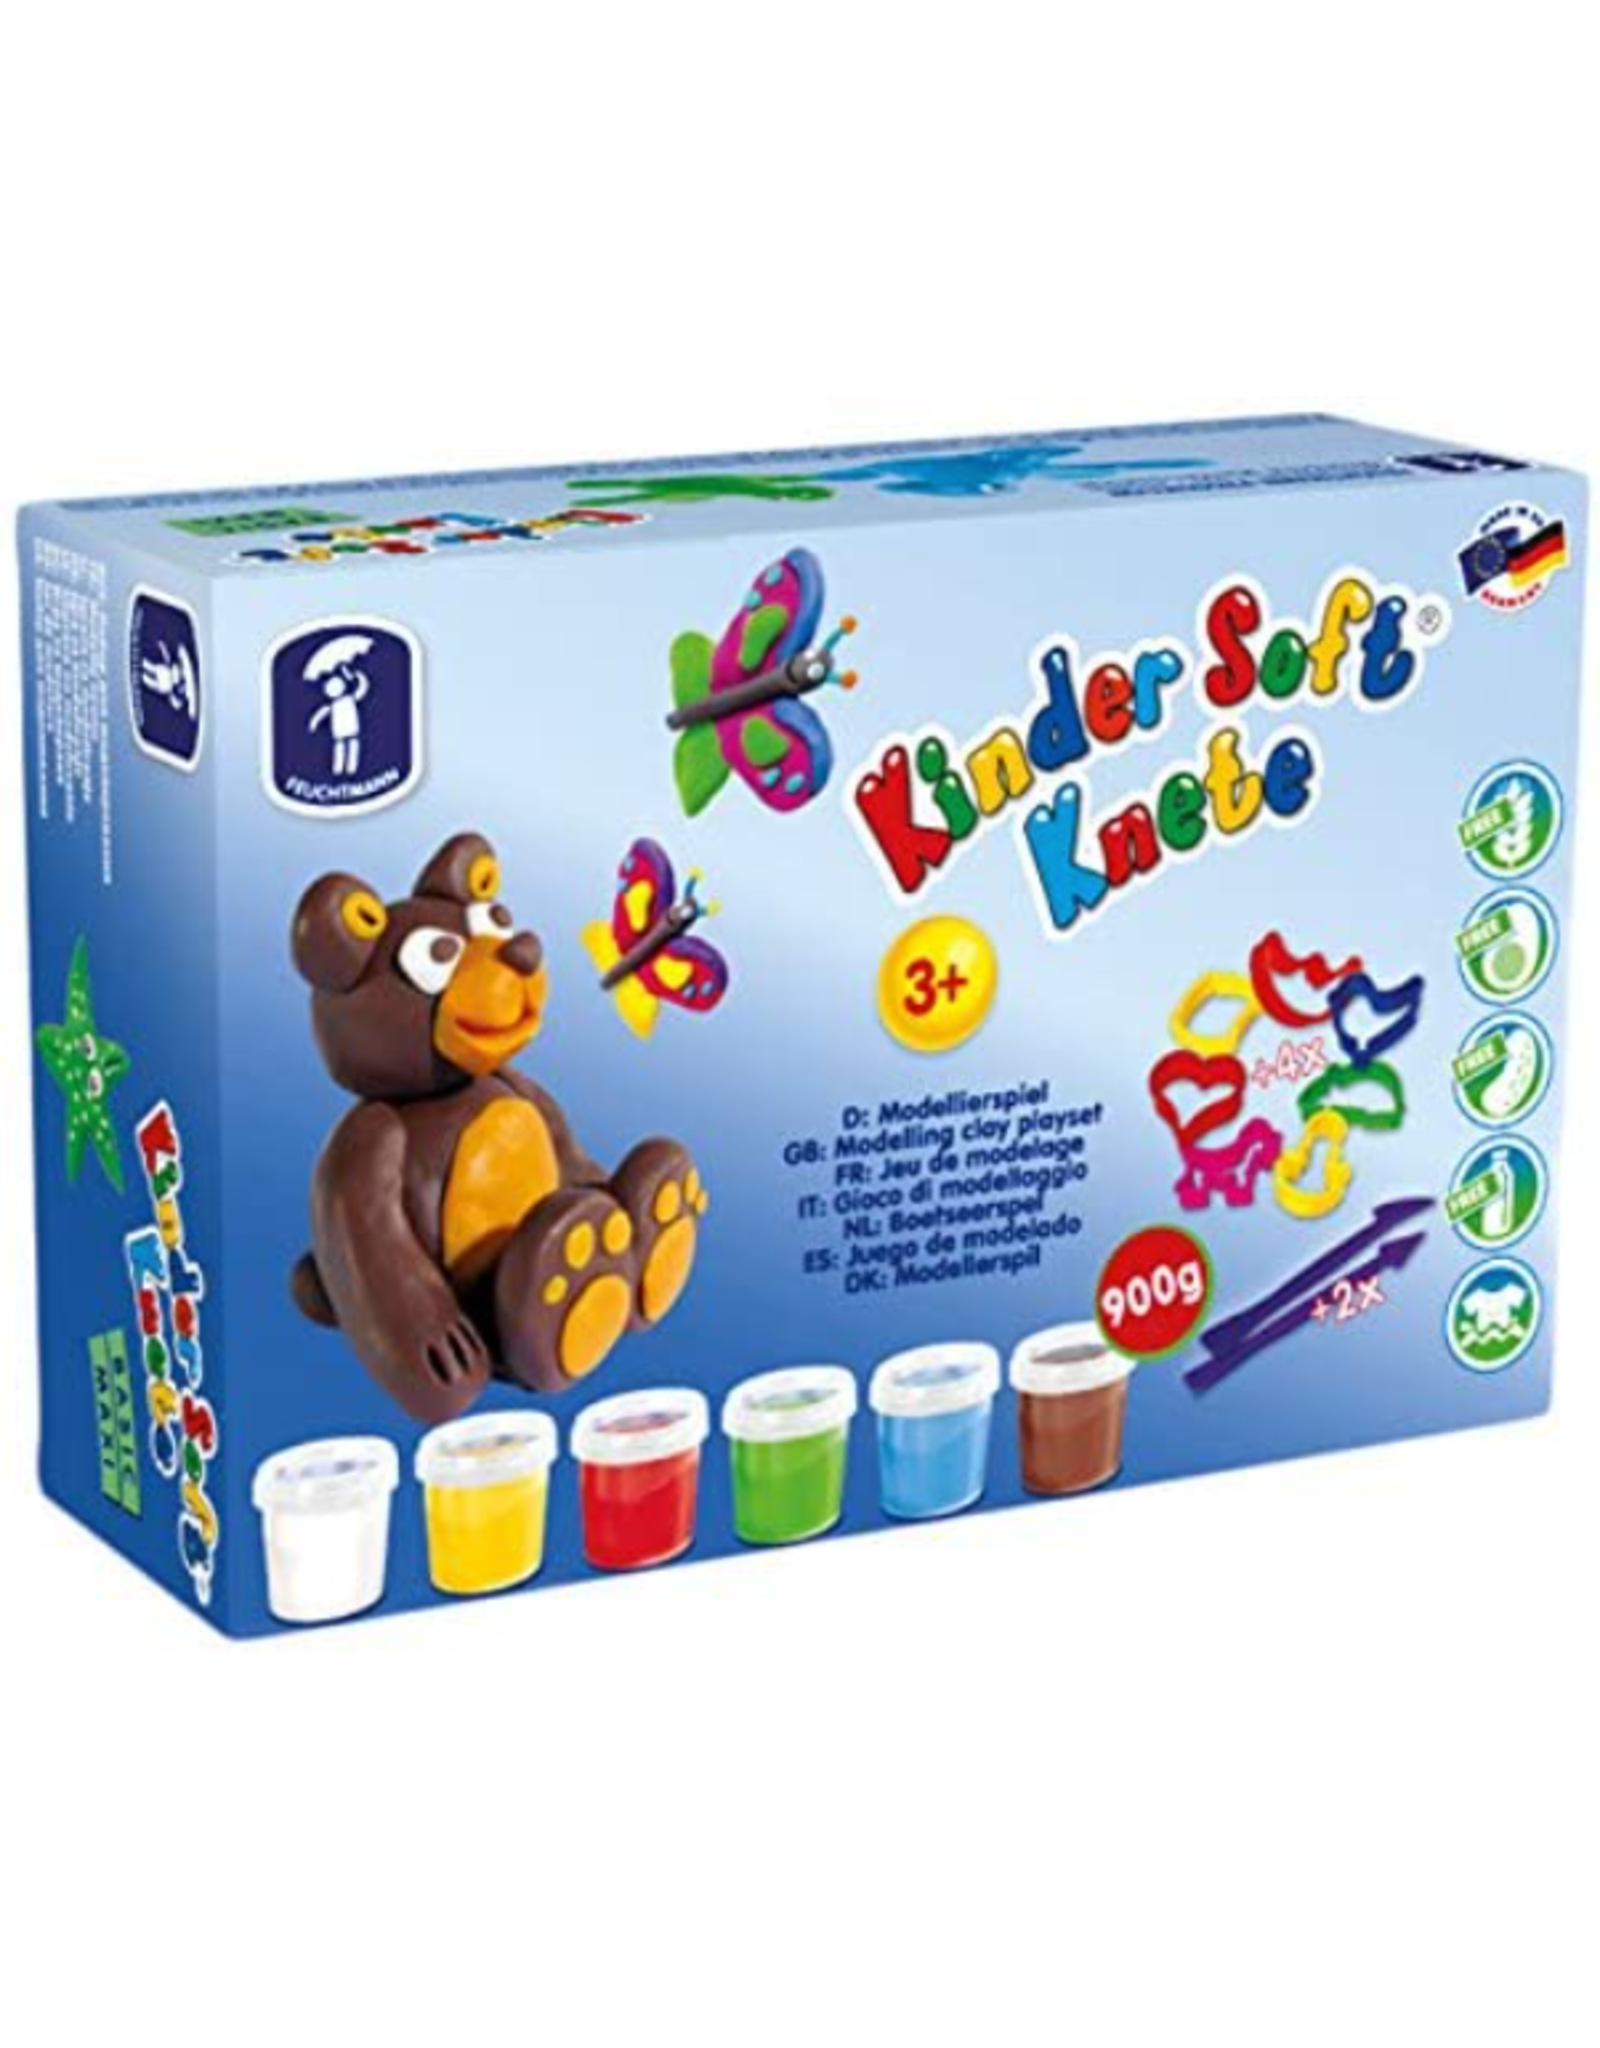 Feuchtmann  Kinder-Soft-Knete - soft air-drying modeling clay - maxi - 900 grams